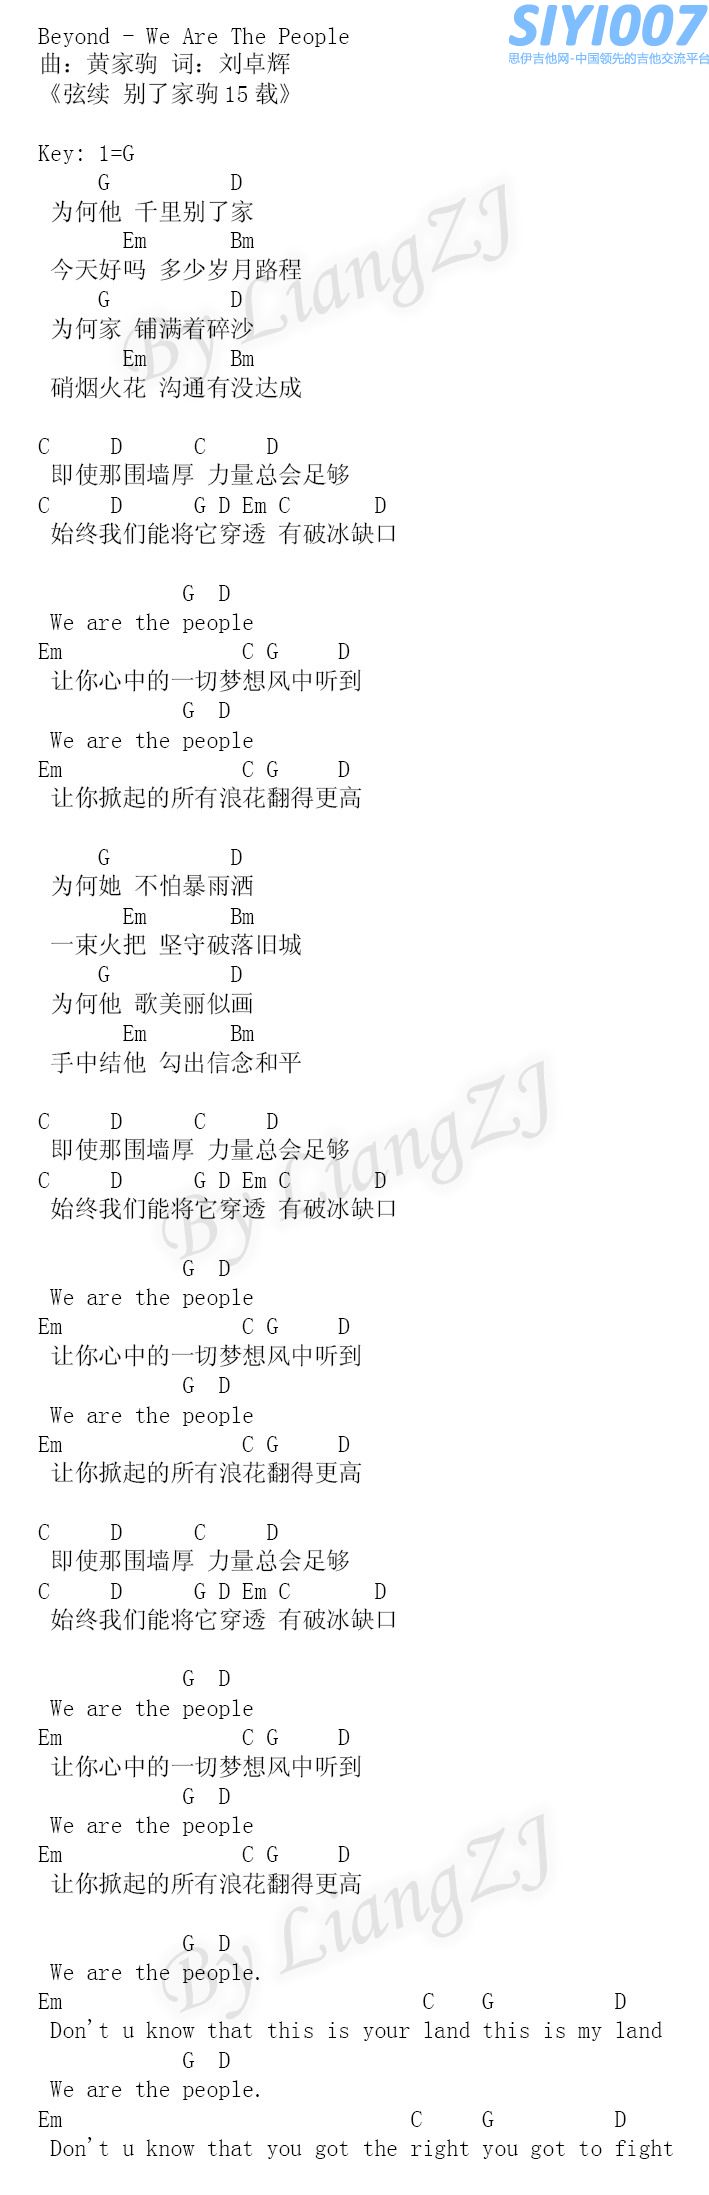 Beyond《We are the people》吉他谱